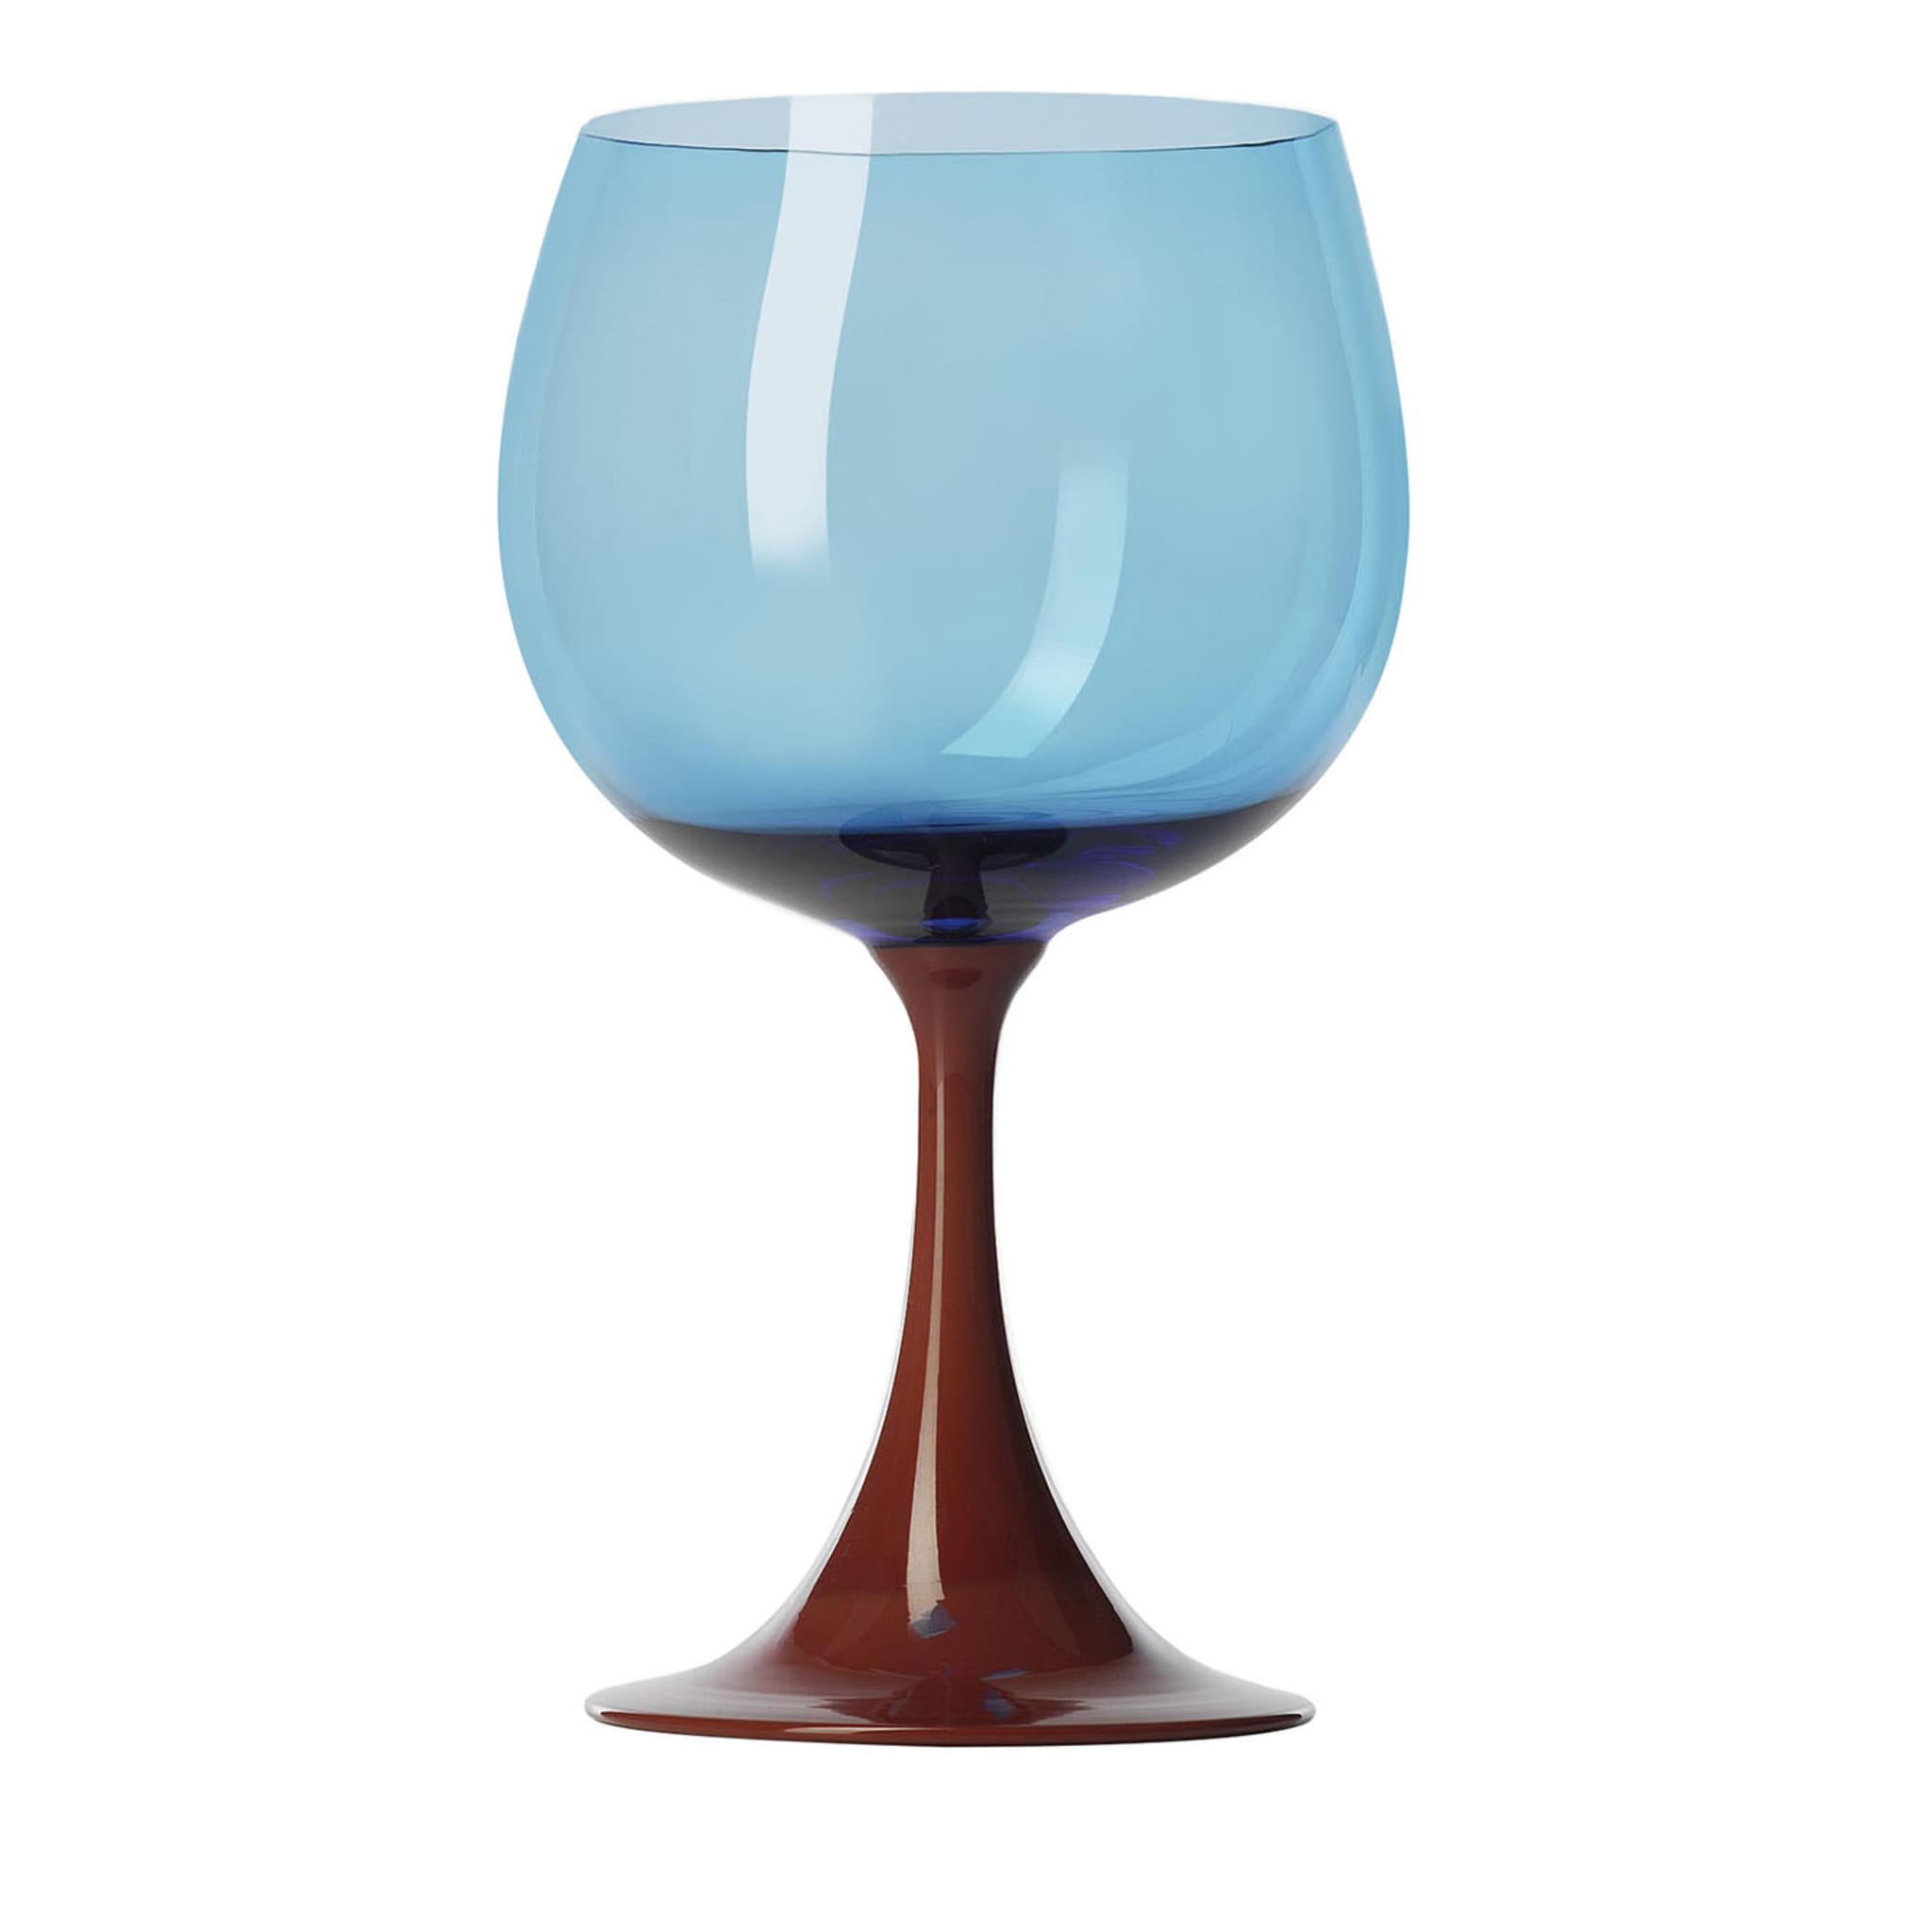 Burlesque Coral & Blue Stem Glass by Stefano Marcato - Main view